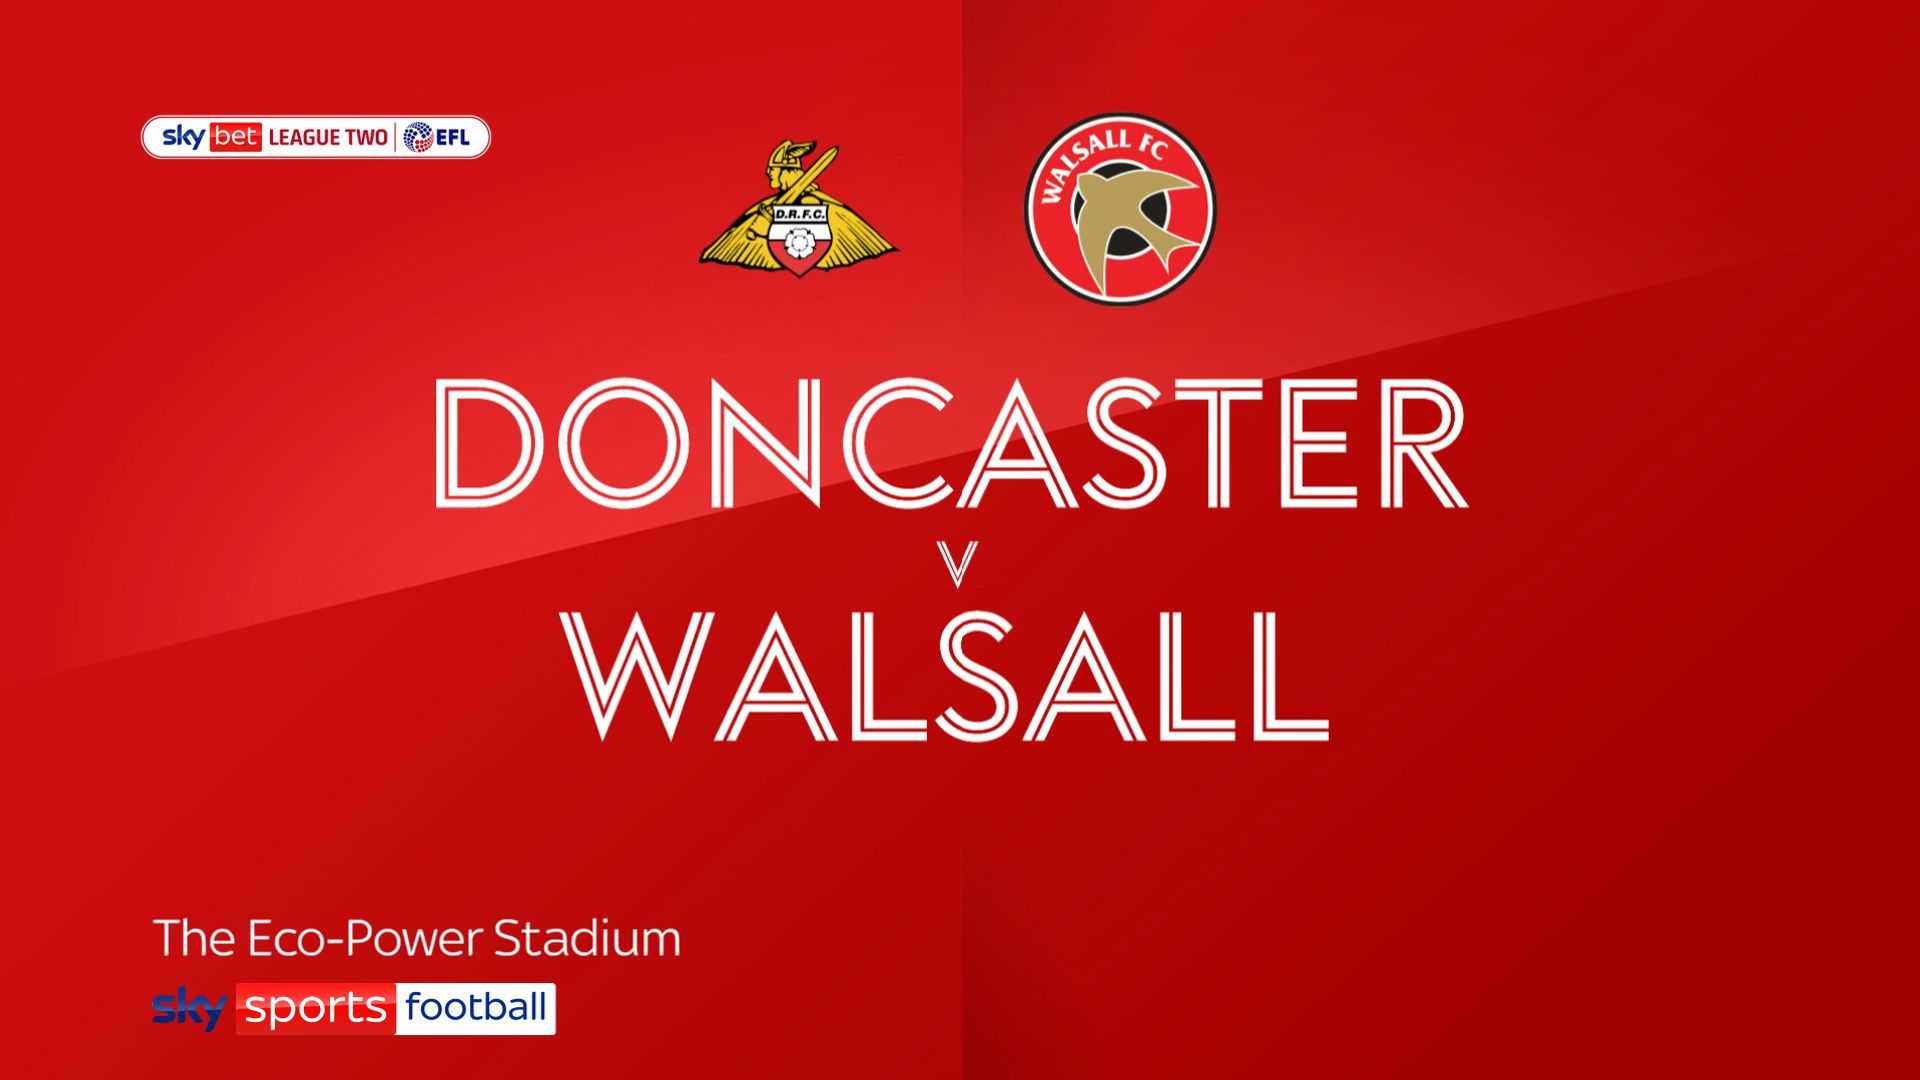 Walsall see off Doncaster